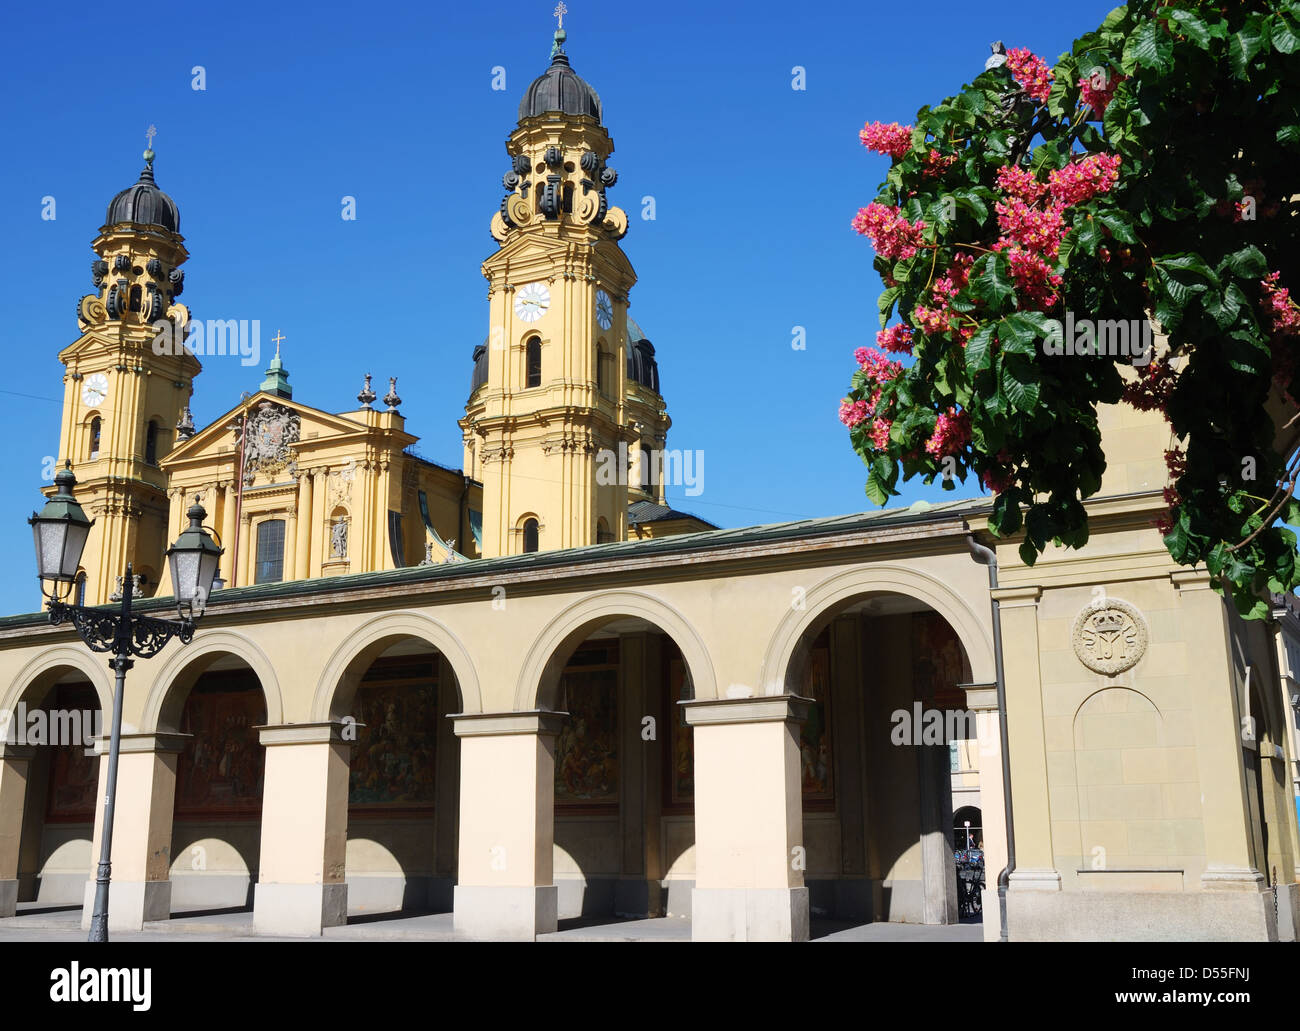 Theatiner church in Munich with flowering trees Stock Photo